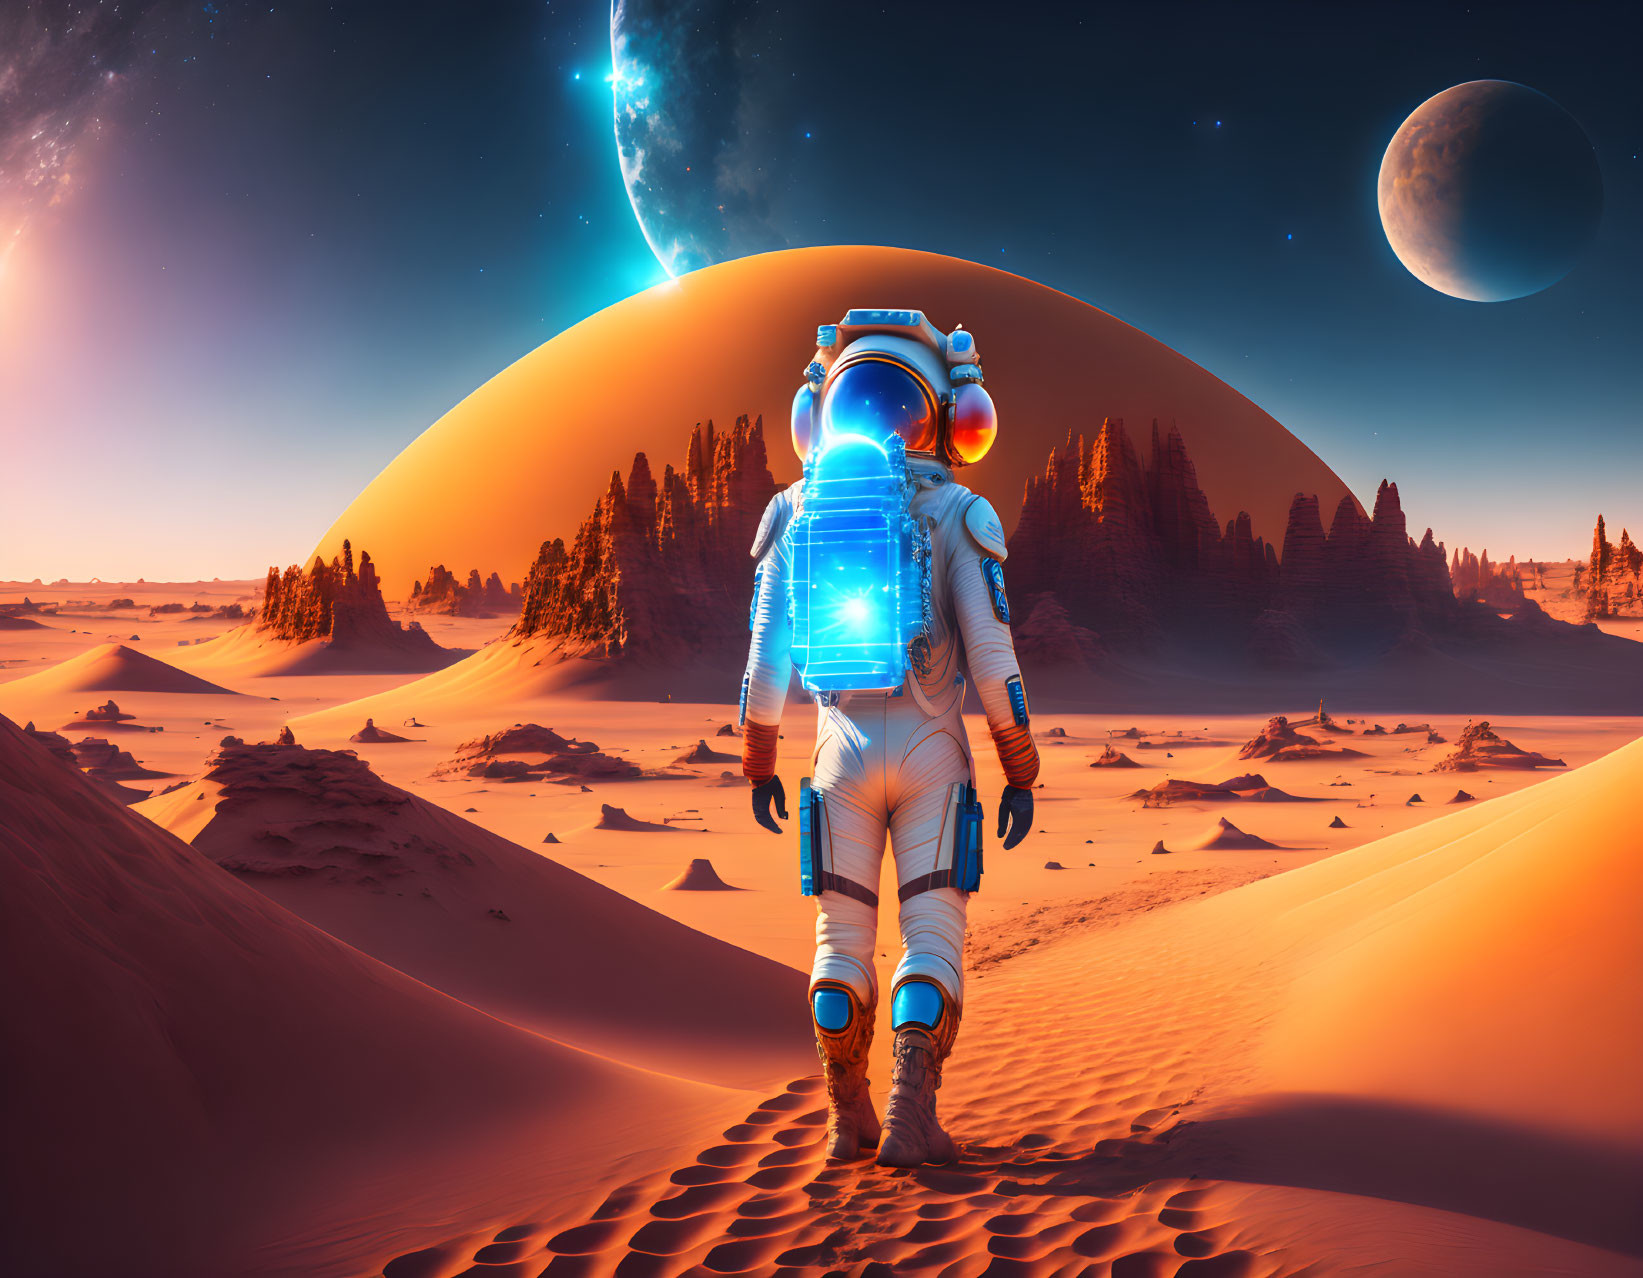 Astronaut on alien planet with moons and starry sky